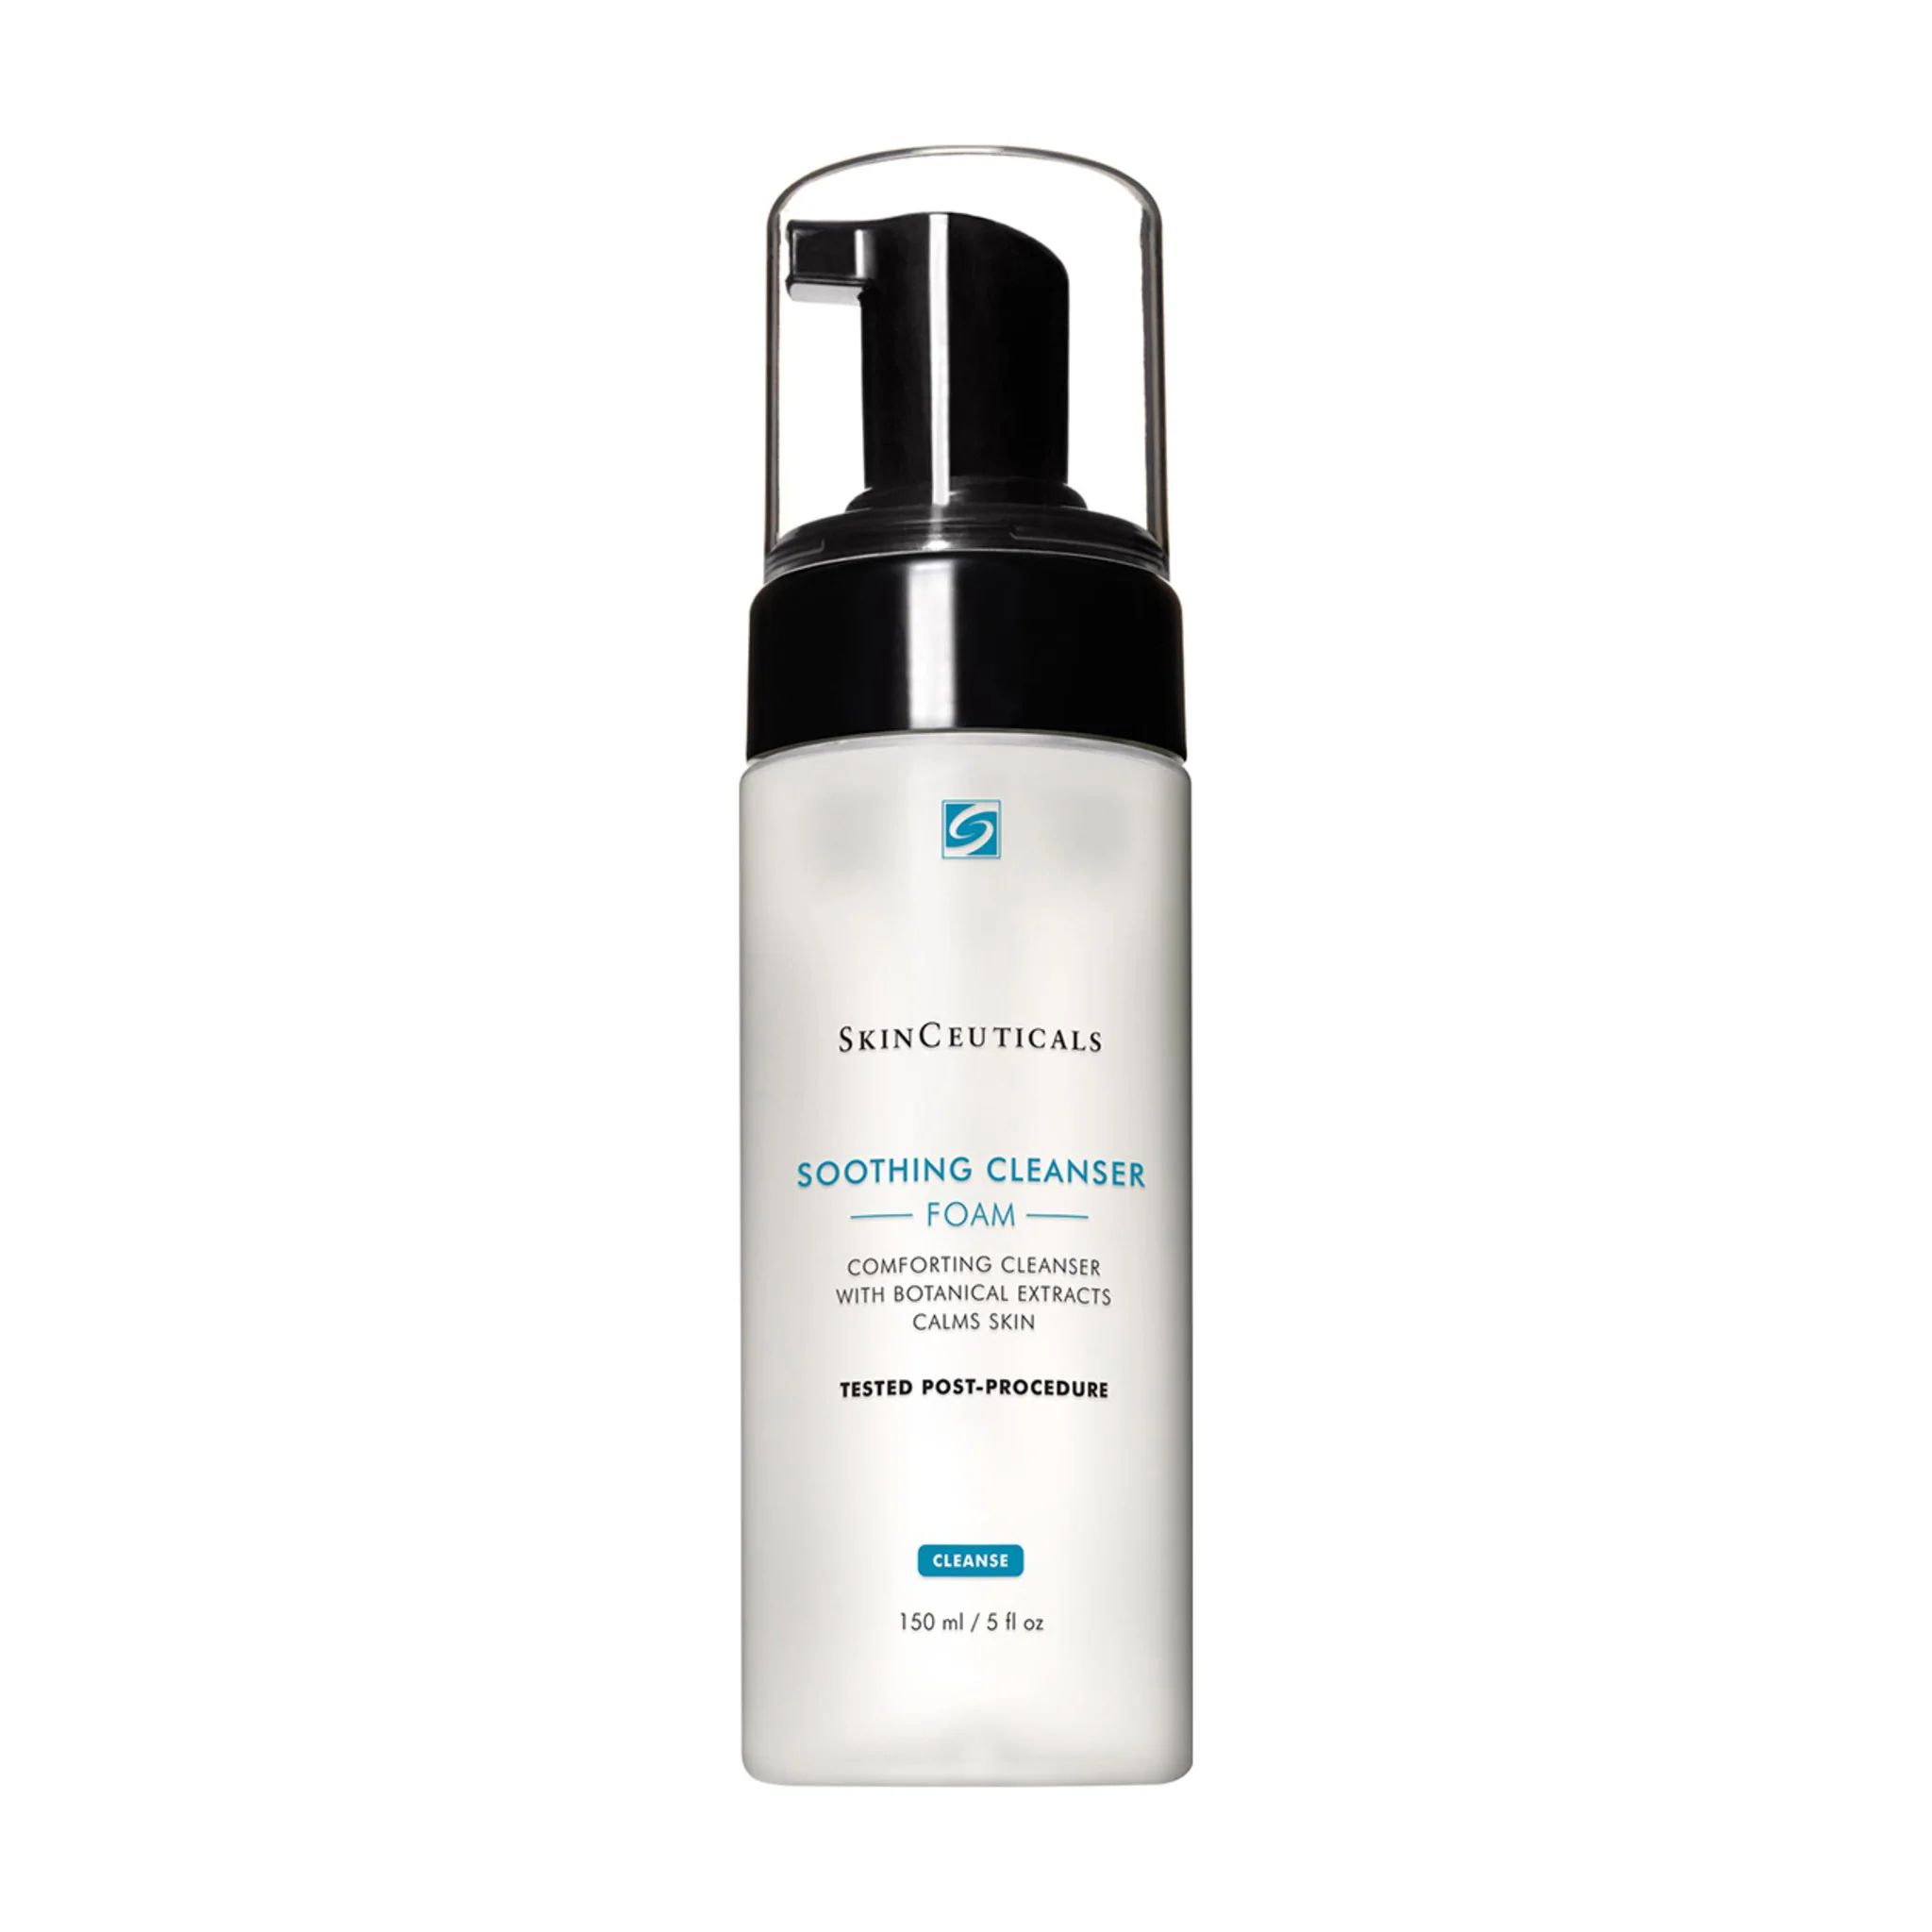 Soothing Cleanser | Bluemercury, Inc.